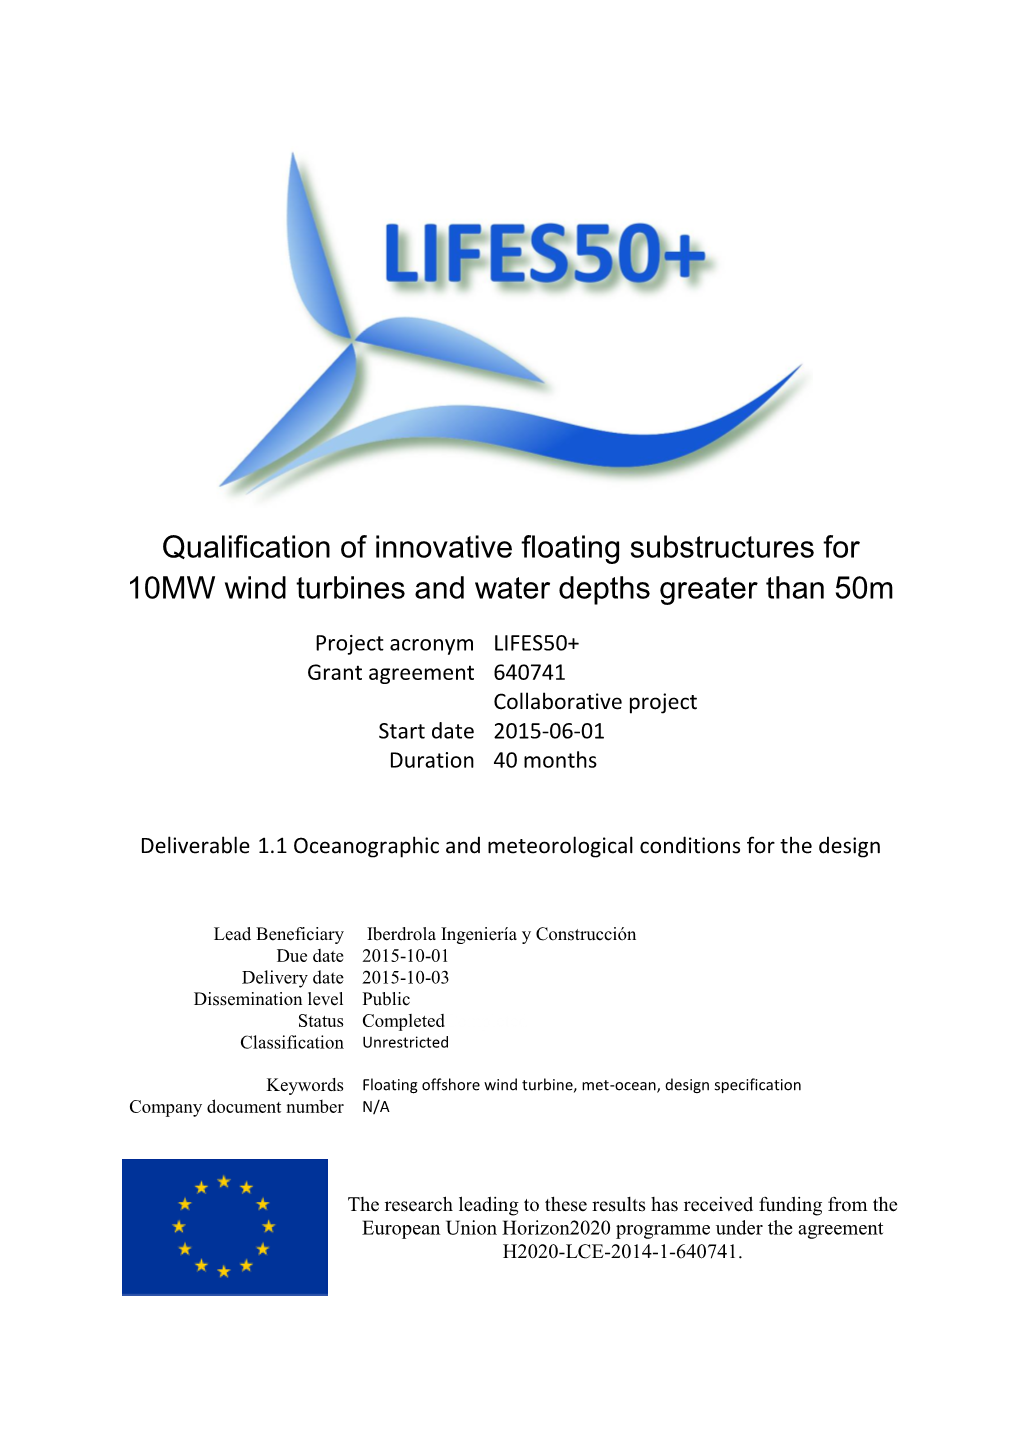 LIFES50+ Deliverable 1.1 Oceanographic and Meteorological